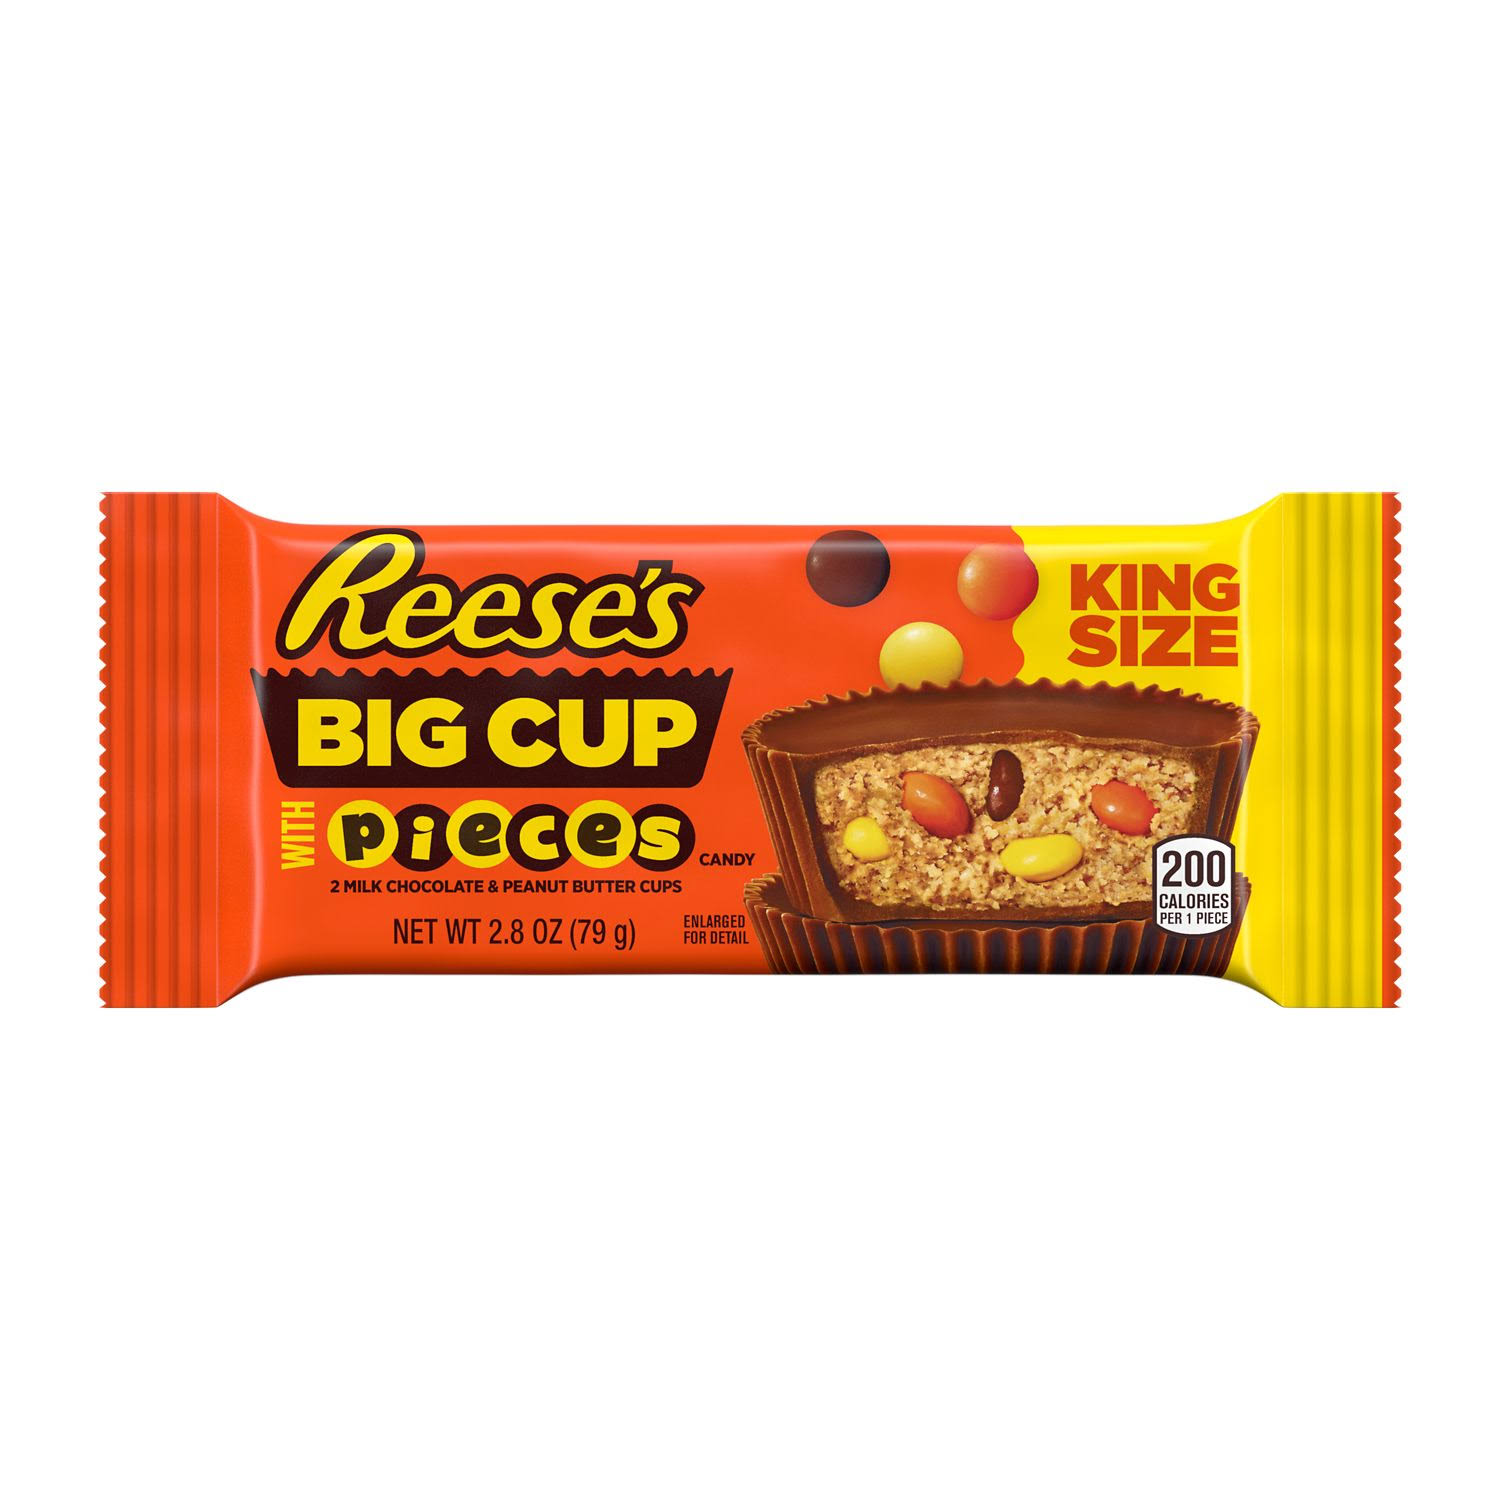 Reeses's Pieces Peanut Butter Cups - King Size, 79g